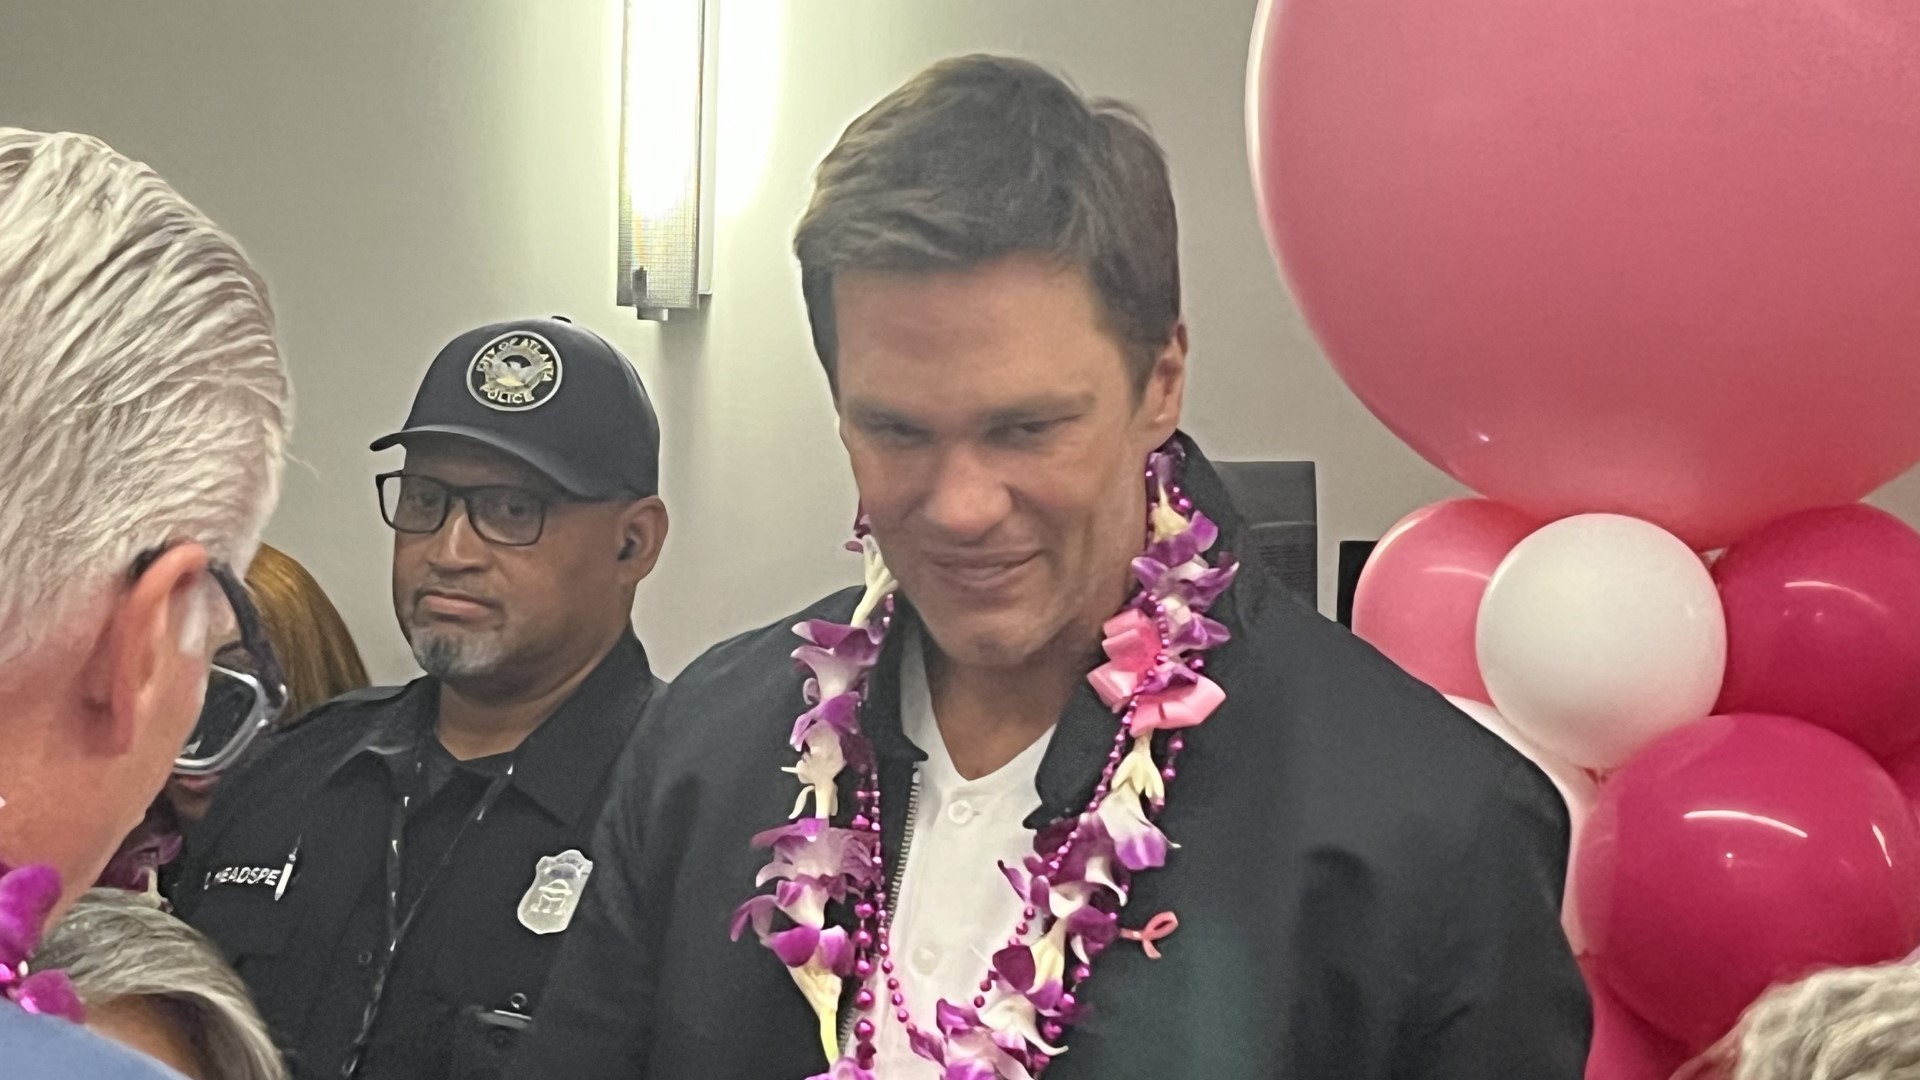 At the Delta Pink event on Monday, Brady talked about his mother's fight with breast cancer herself -- and how she is now seven years in remission.